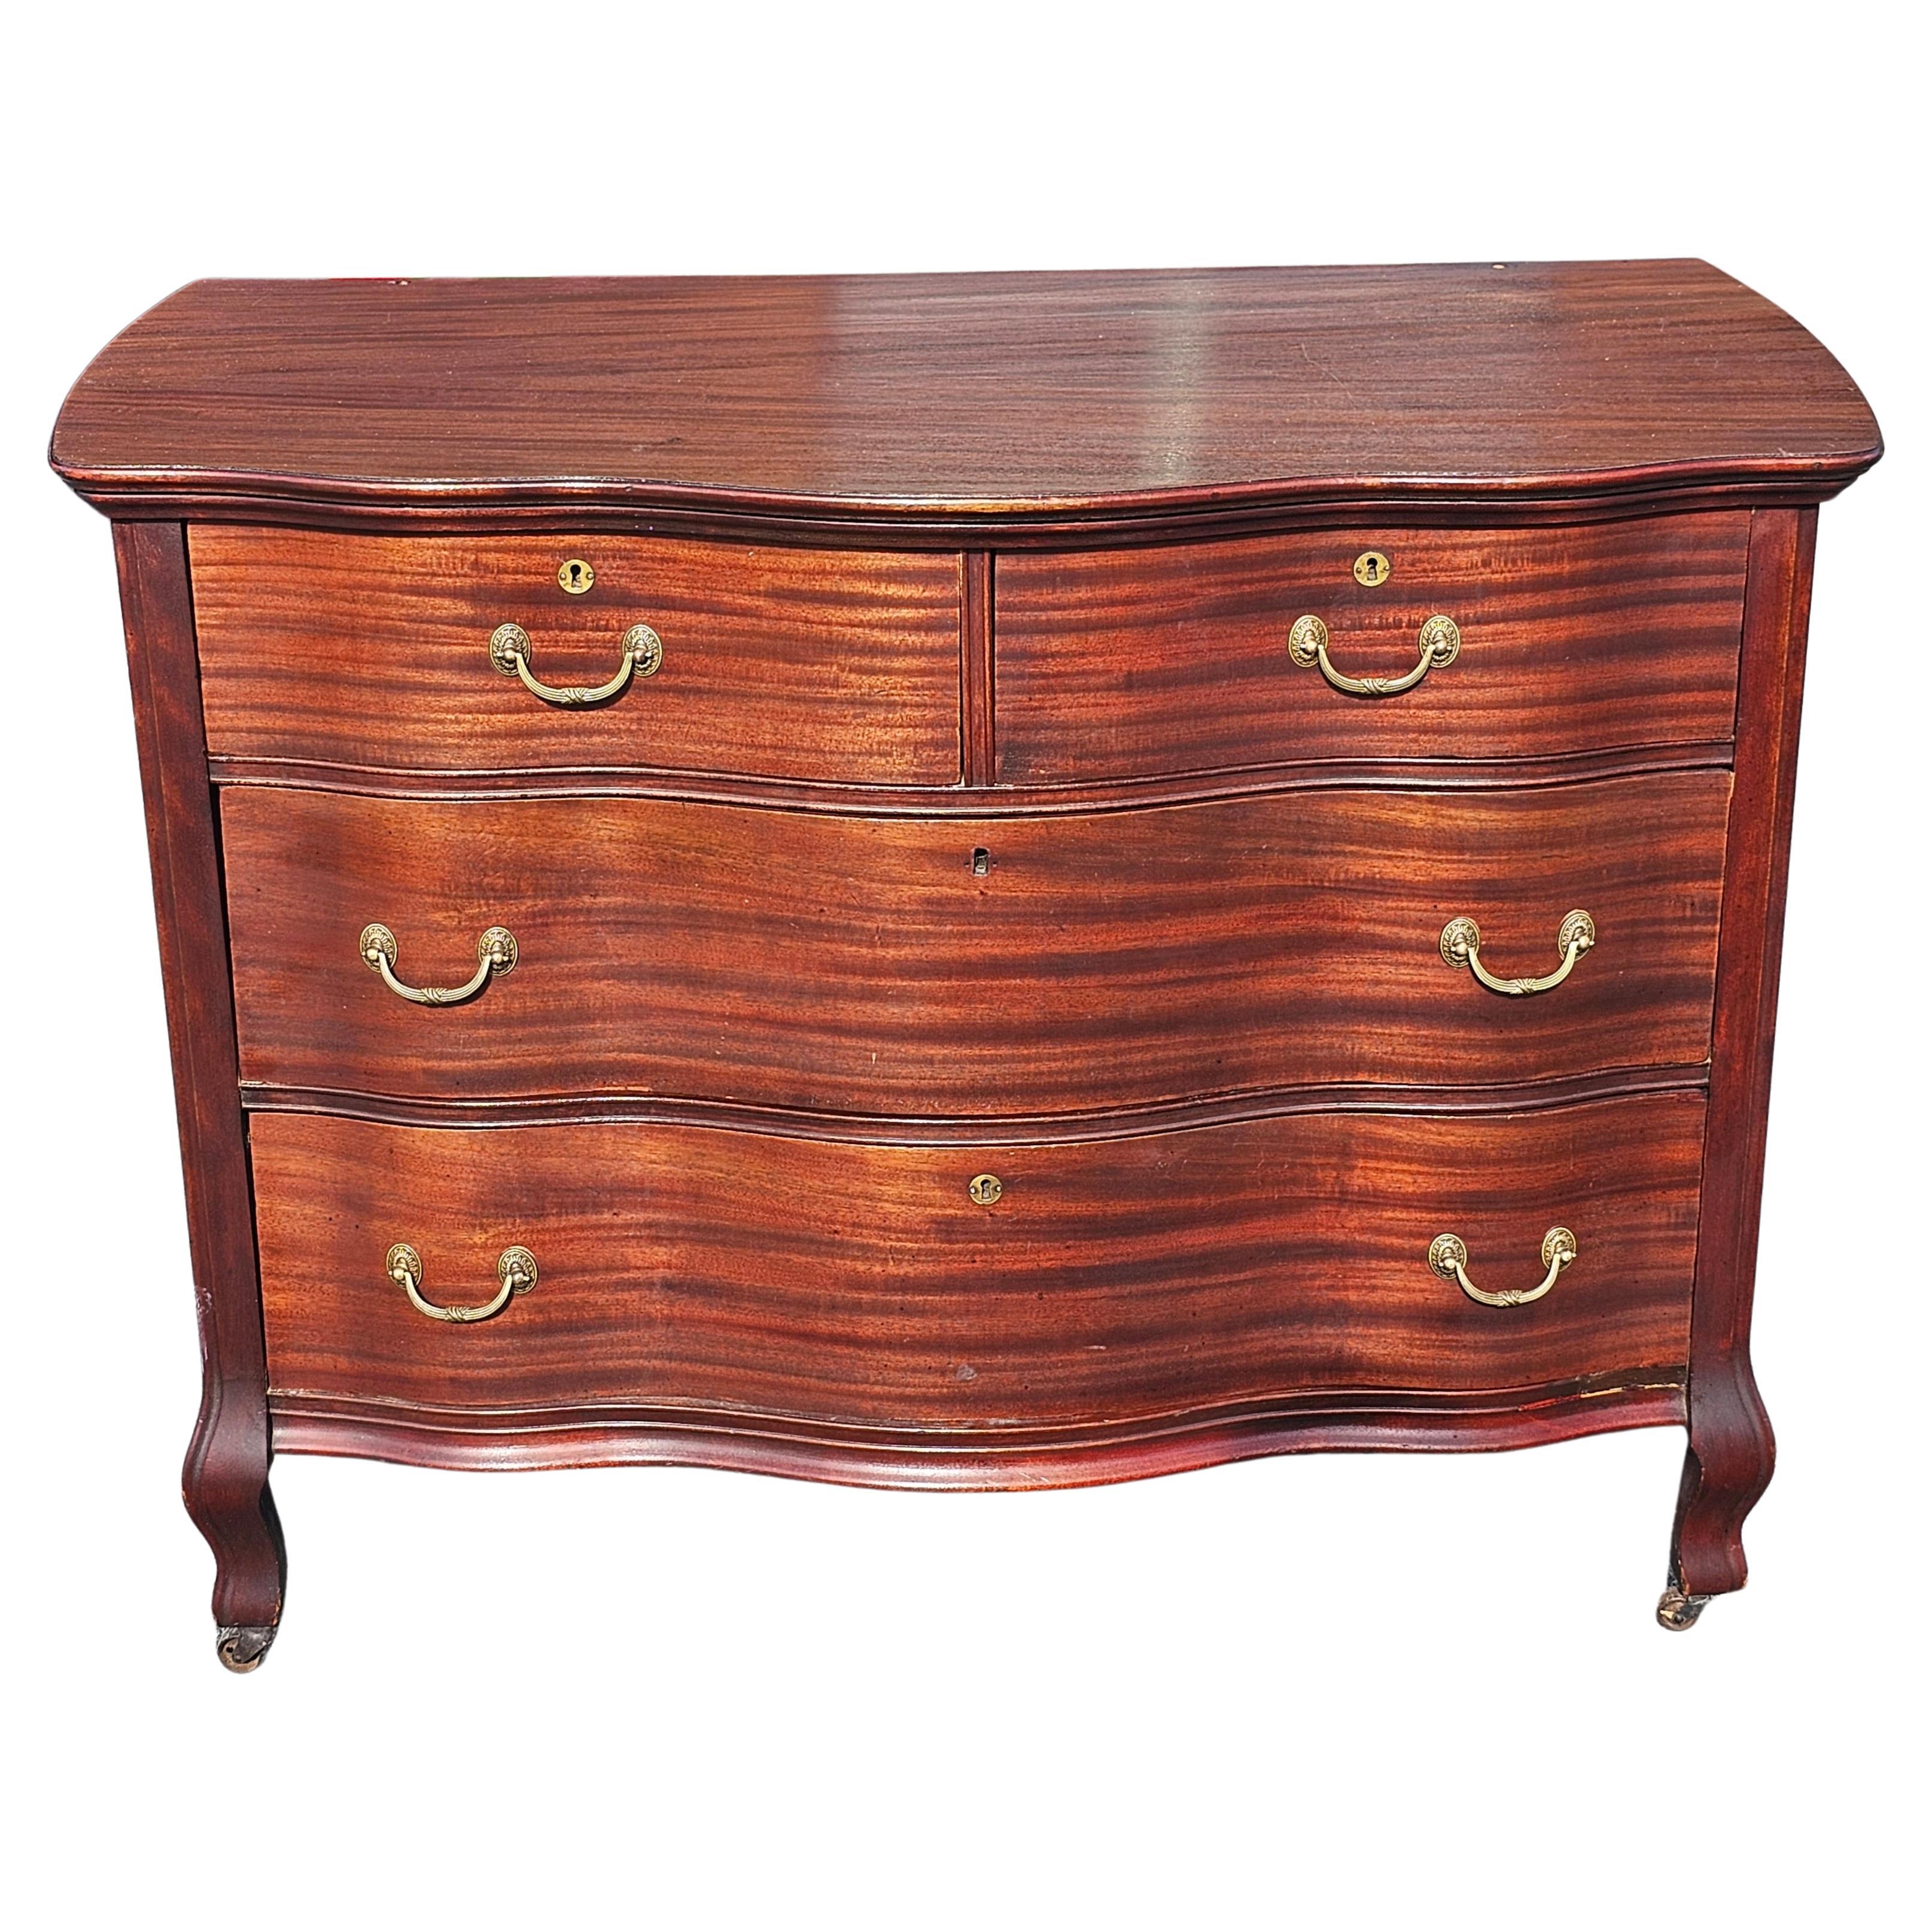 Early 20th Century Widdicomd Tiger Mahogany Serpentine Commode Chest on Wheels